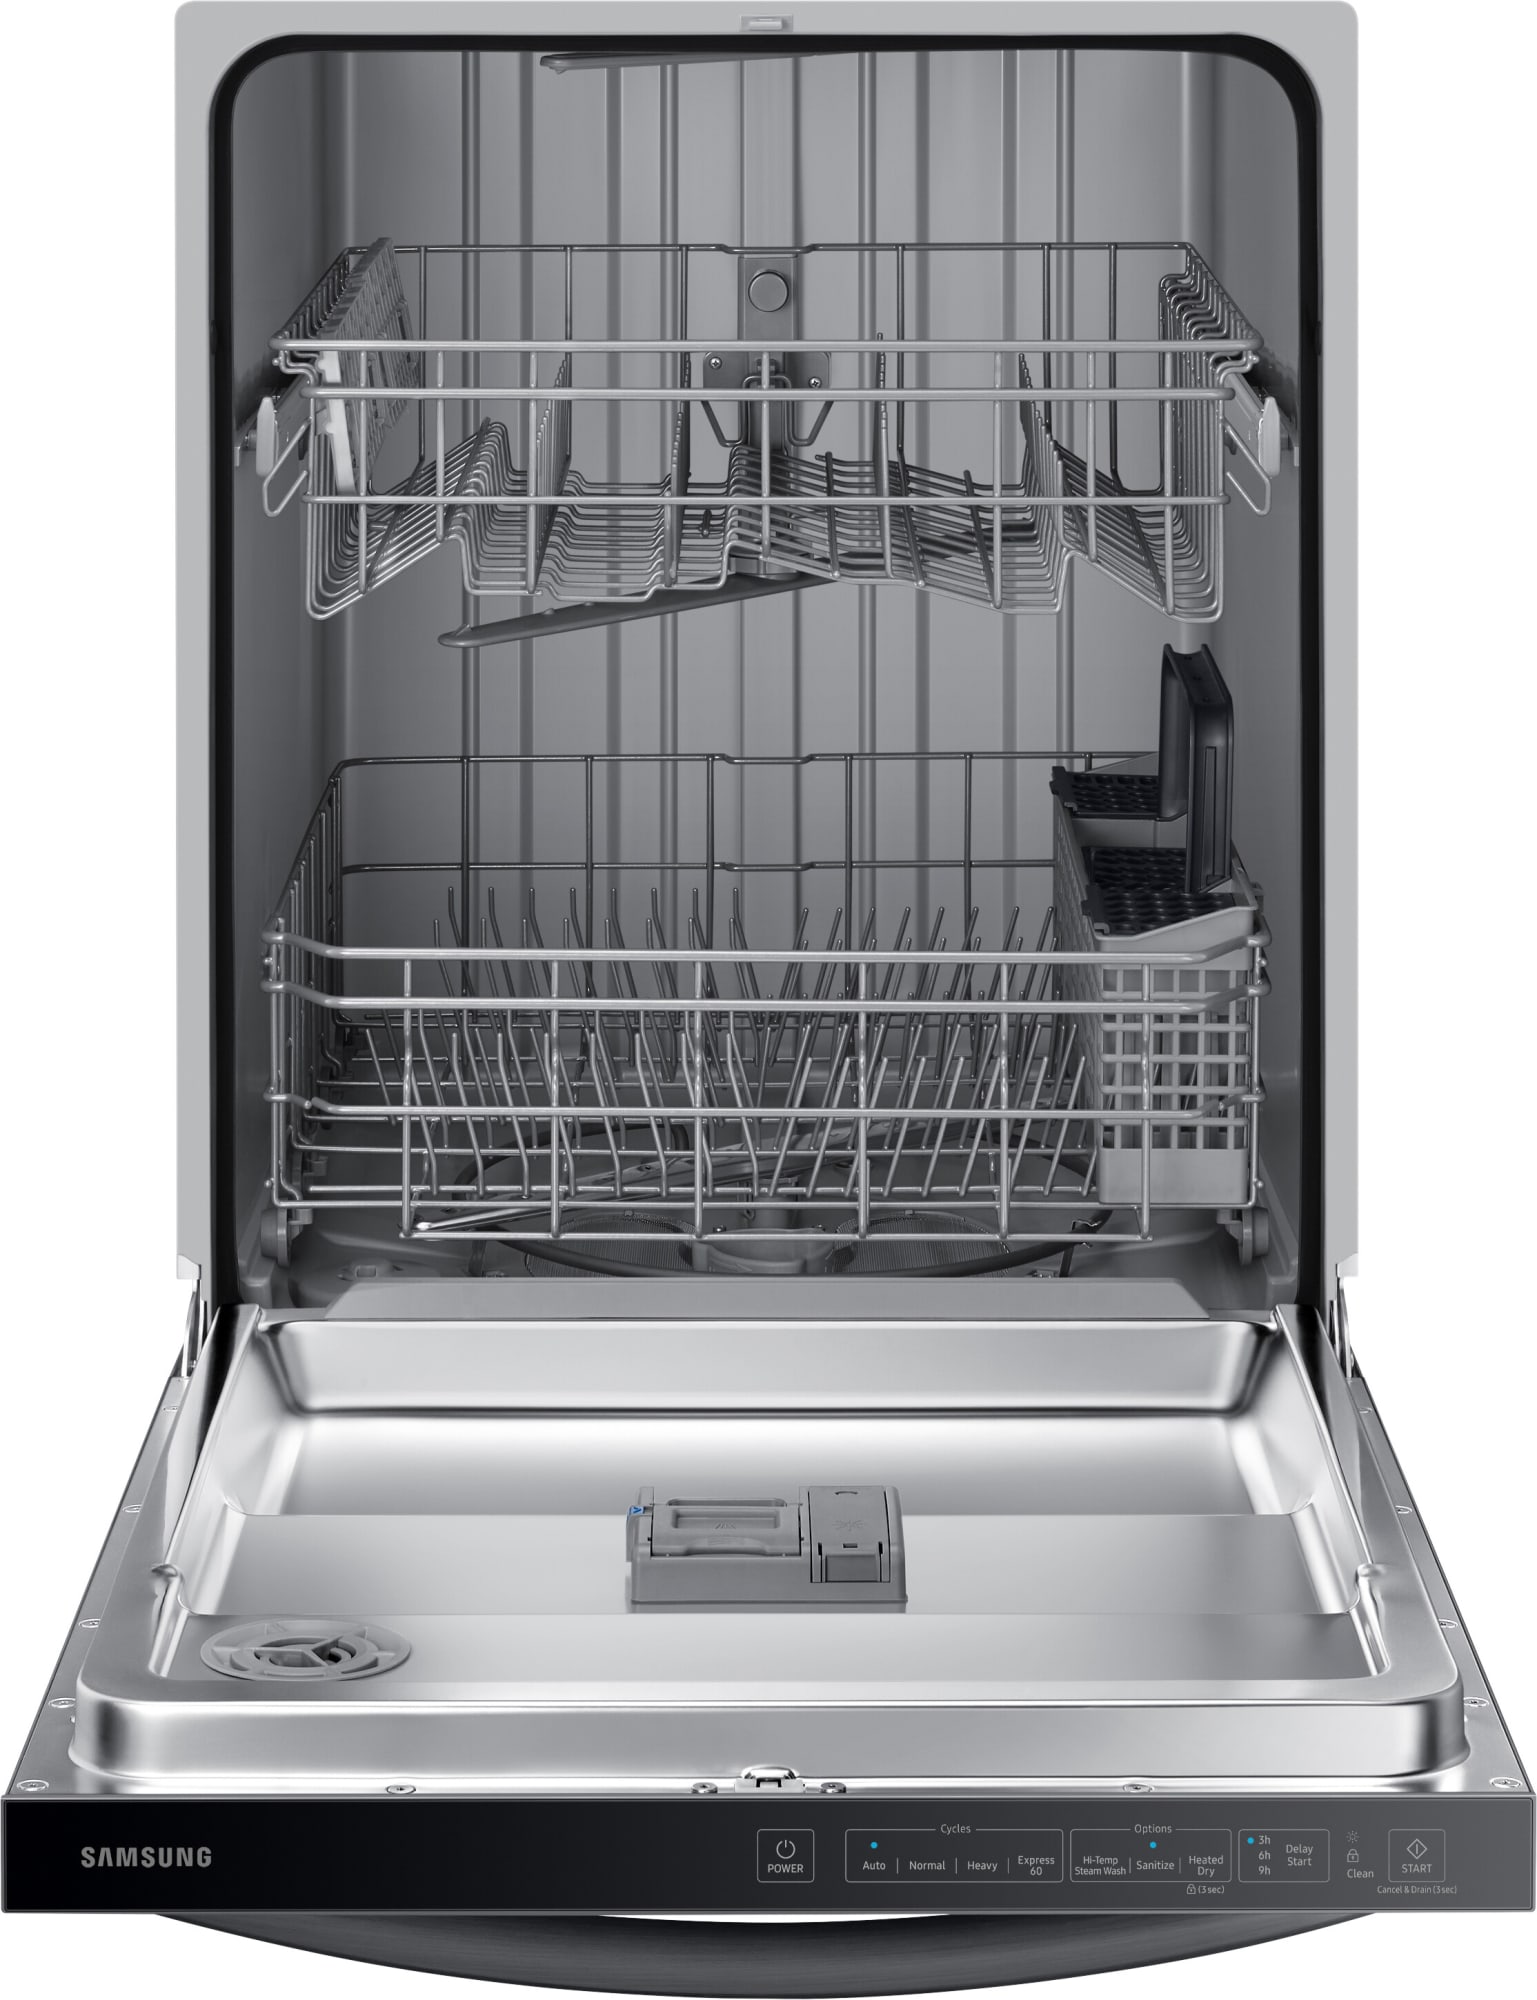 Samsung DW80R2031UG 24 Inch Fully Integrated Dishwasher with 14 Place ...